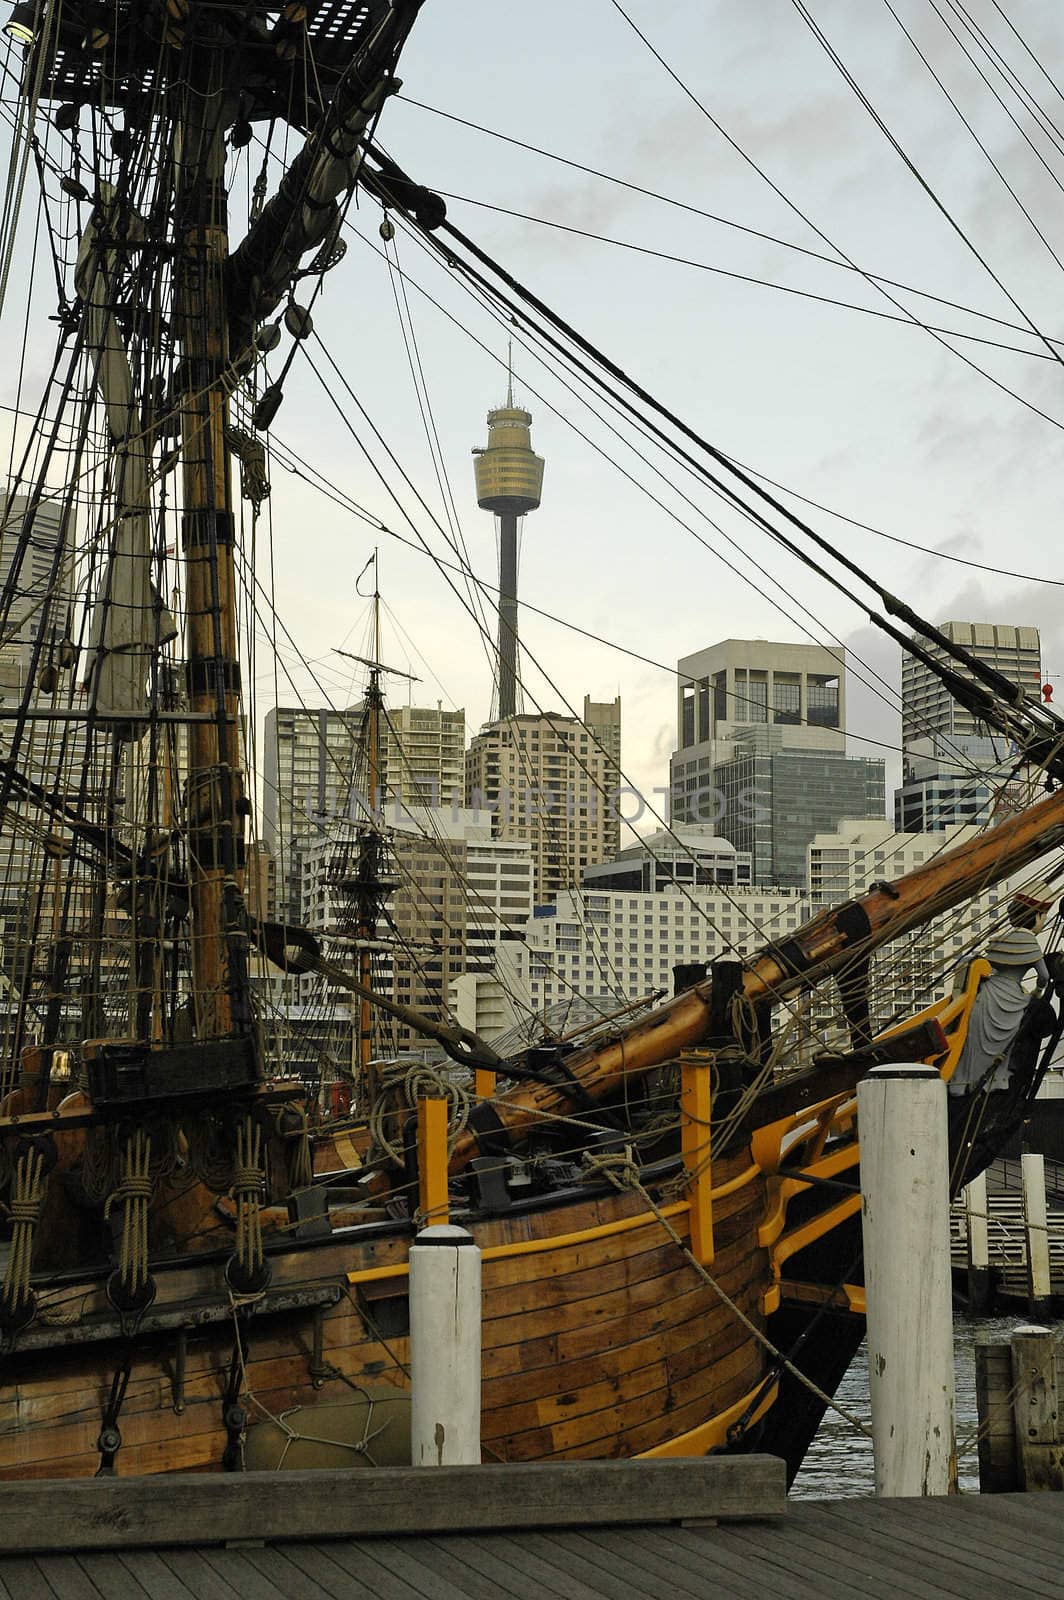 old wooden sailboat anchoring in Darling Harbour in Sydney; sydney tower in background